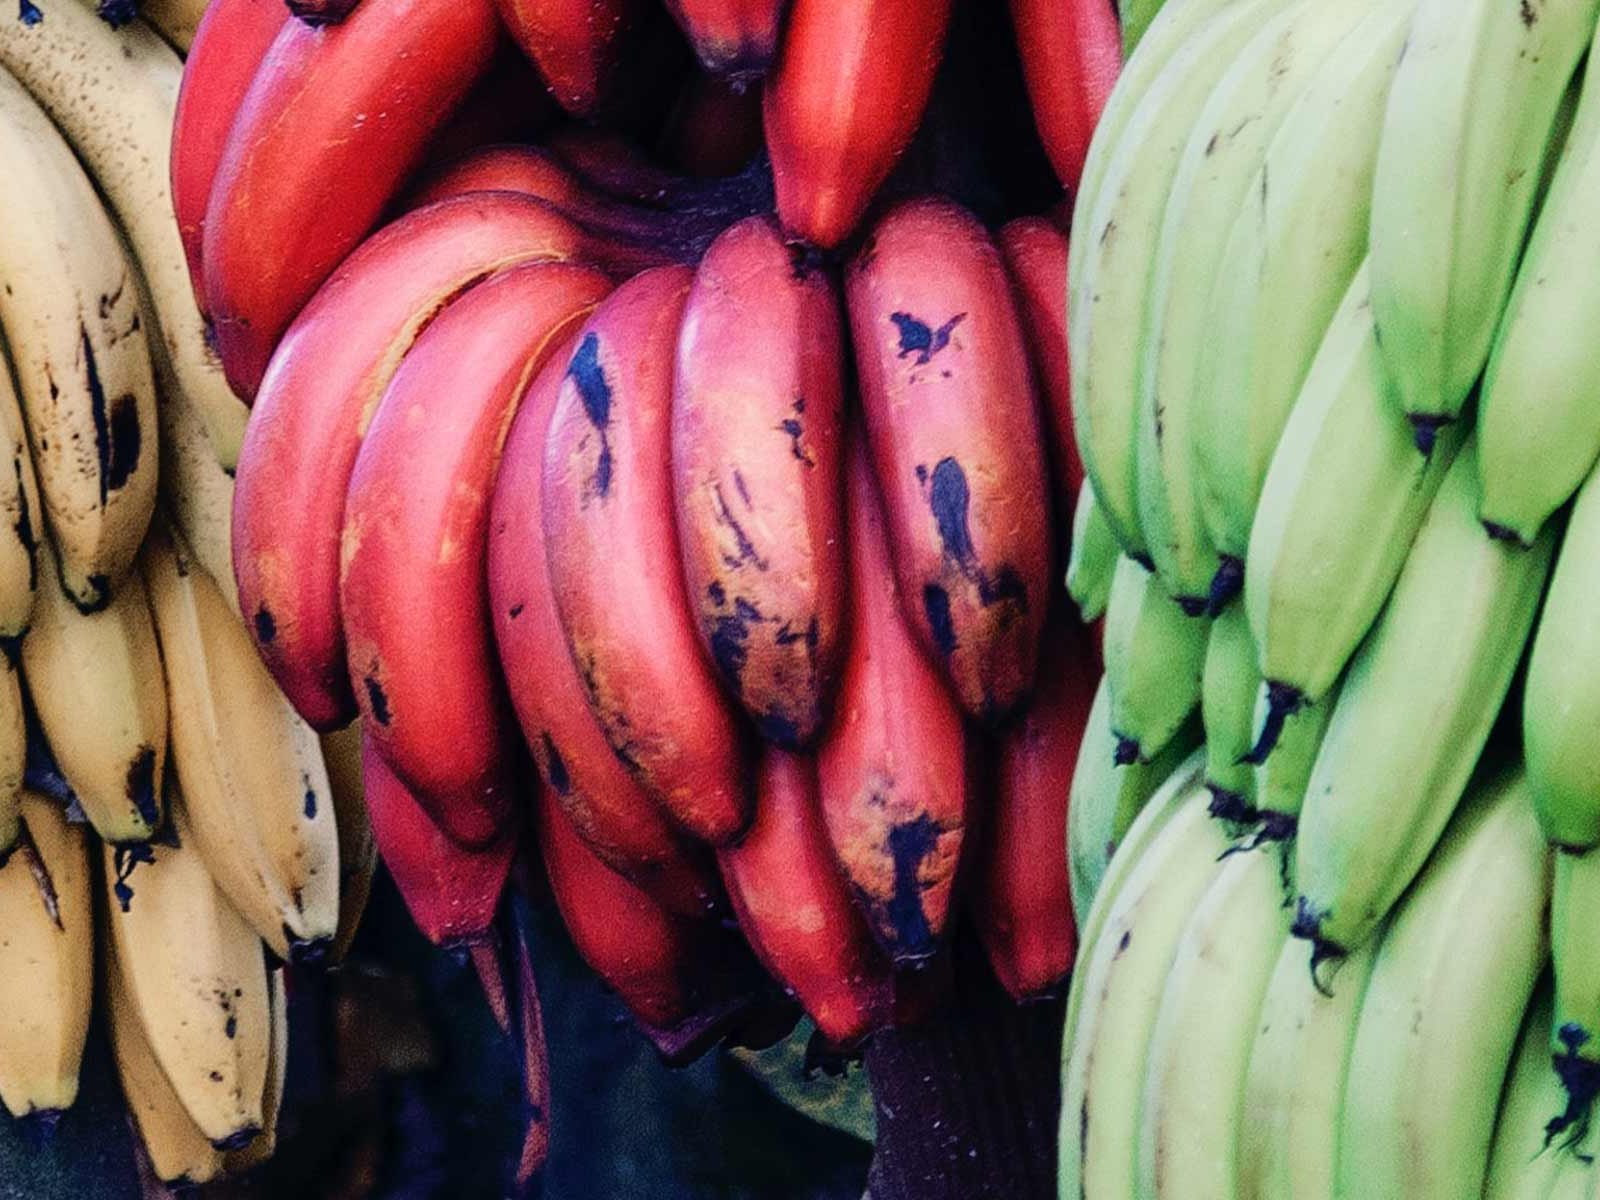 Raw, braised, fried, baked: the red bananas' aromas and flavours can enrich&nbsp;many a dish.